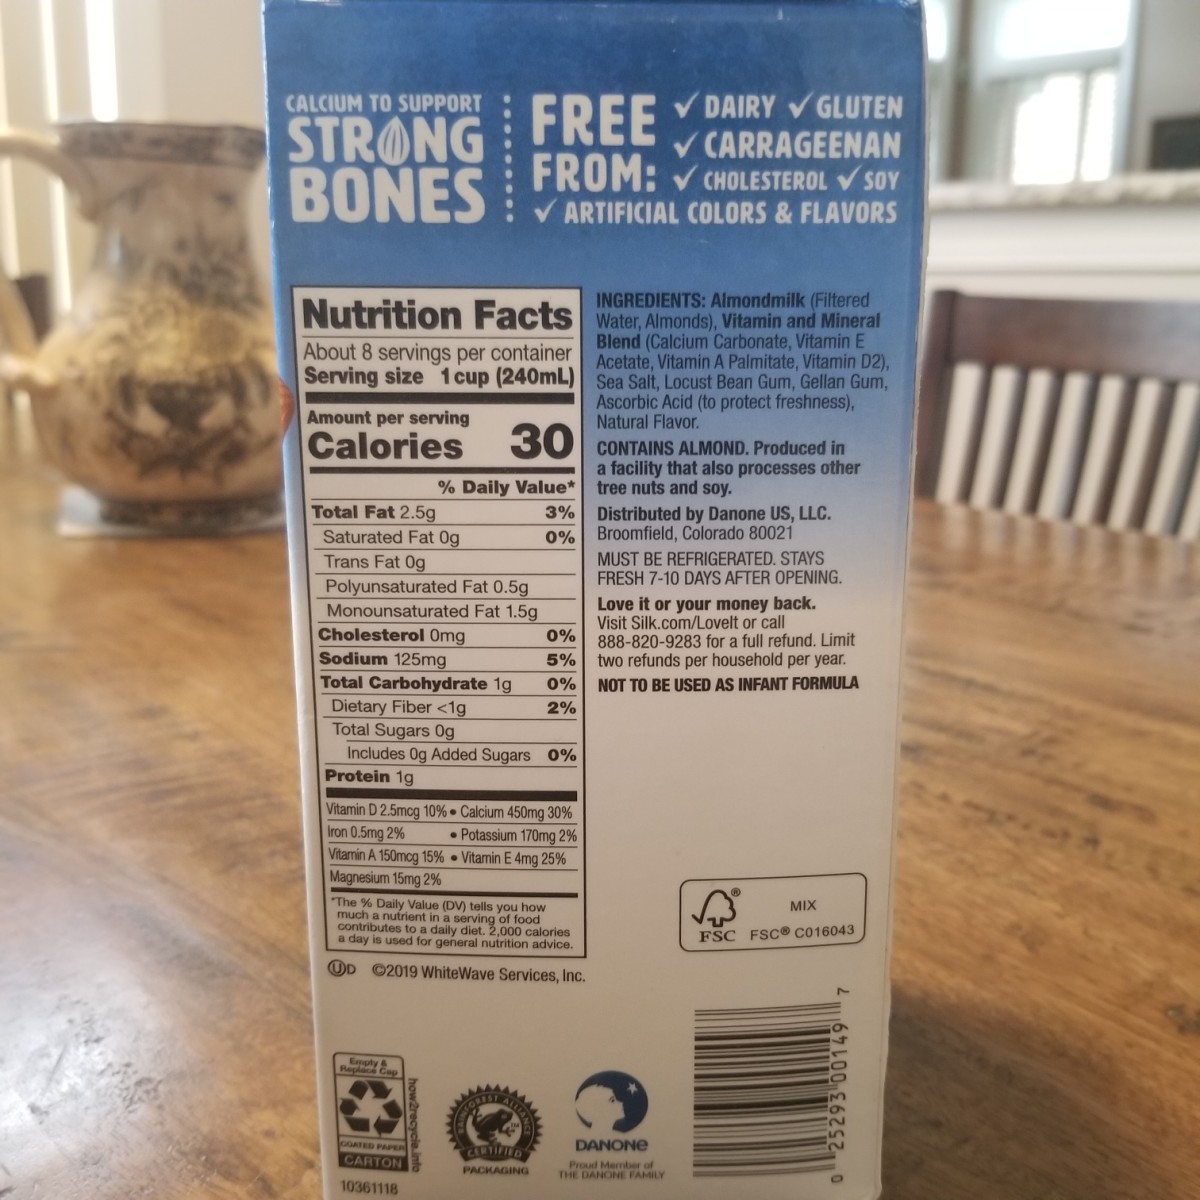 Osteoporosis: How I Fit in My Calcium